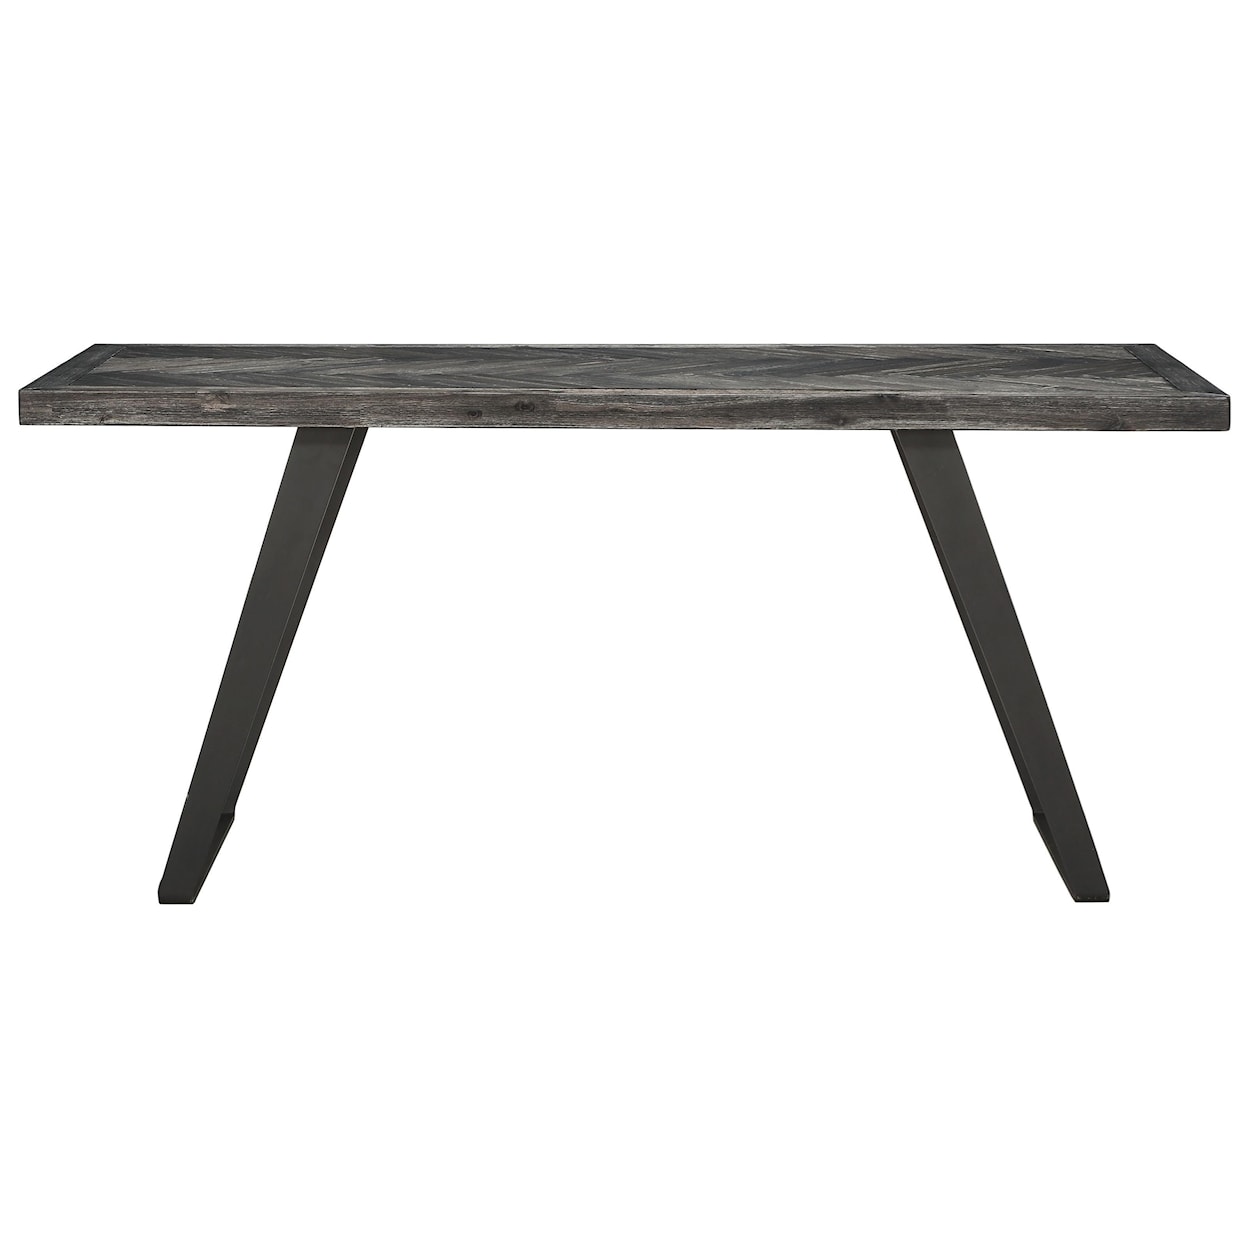 Coast2Coast Home Aspen Court Counter-Height Dining Table